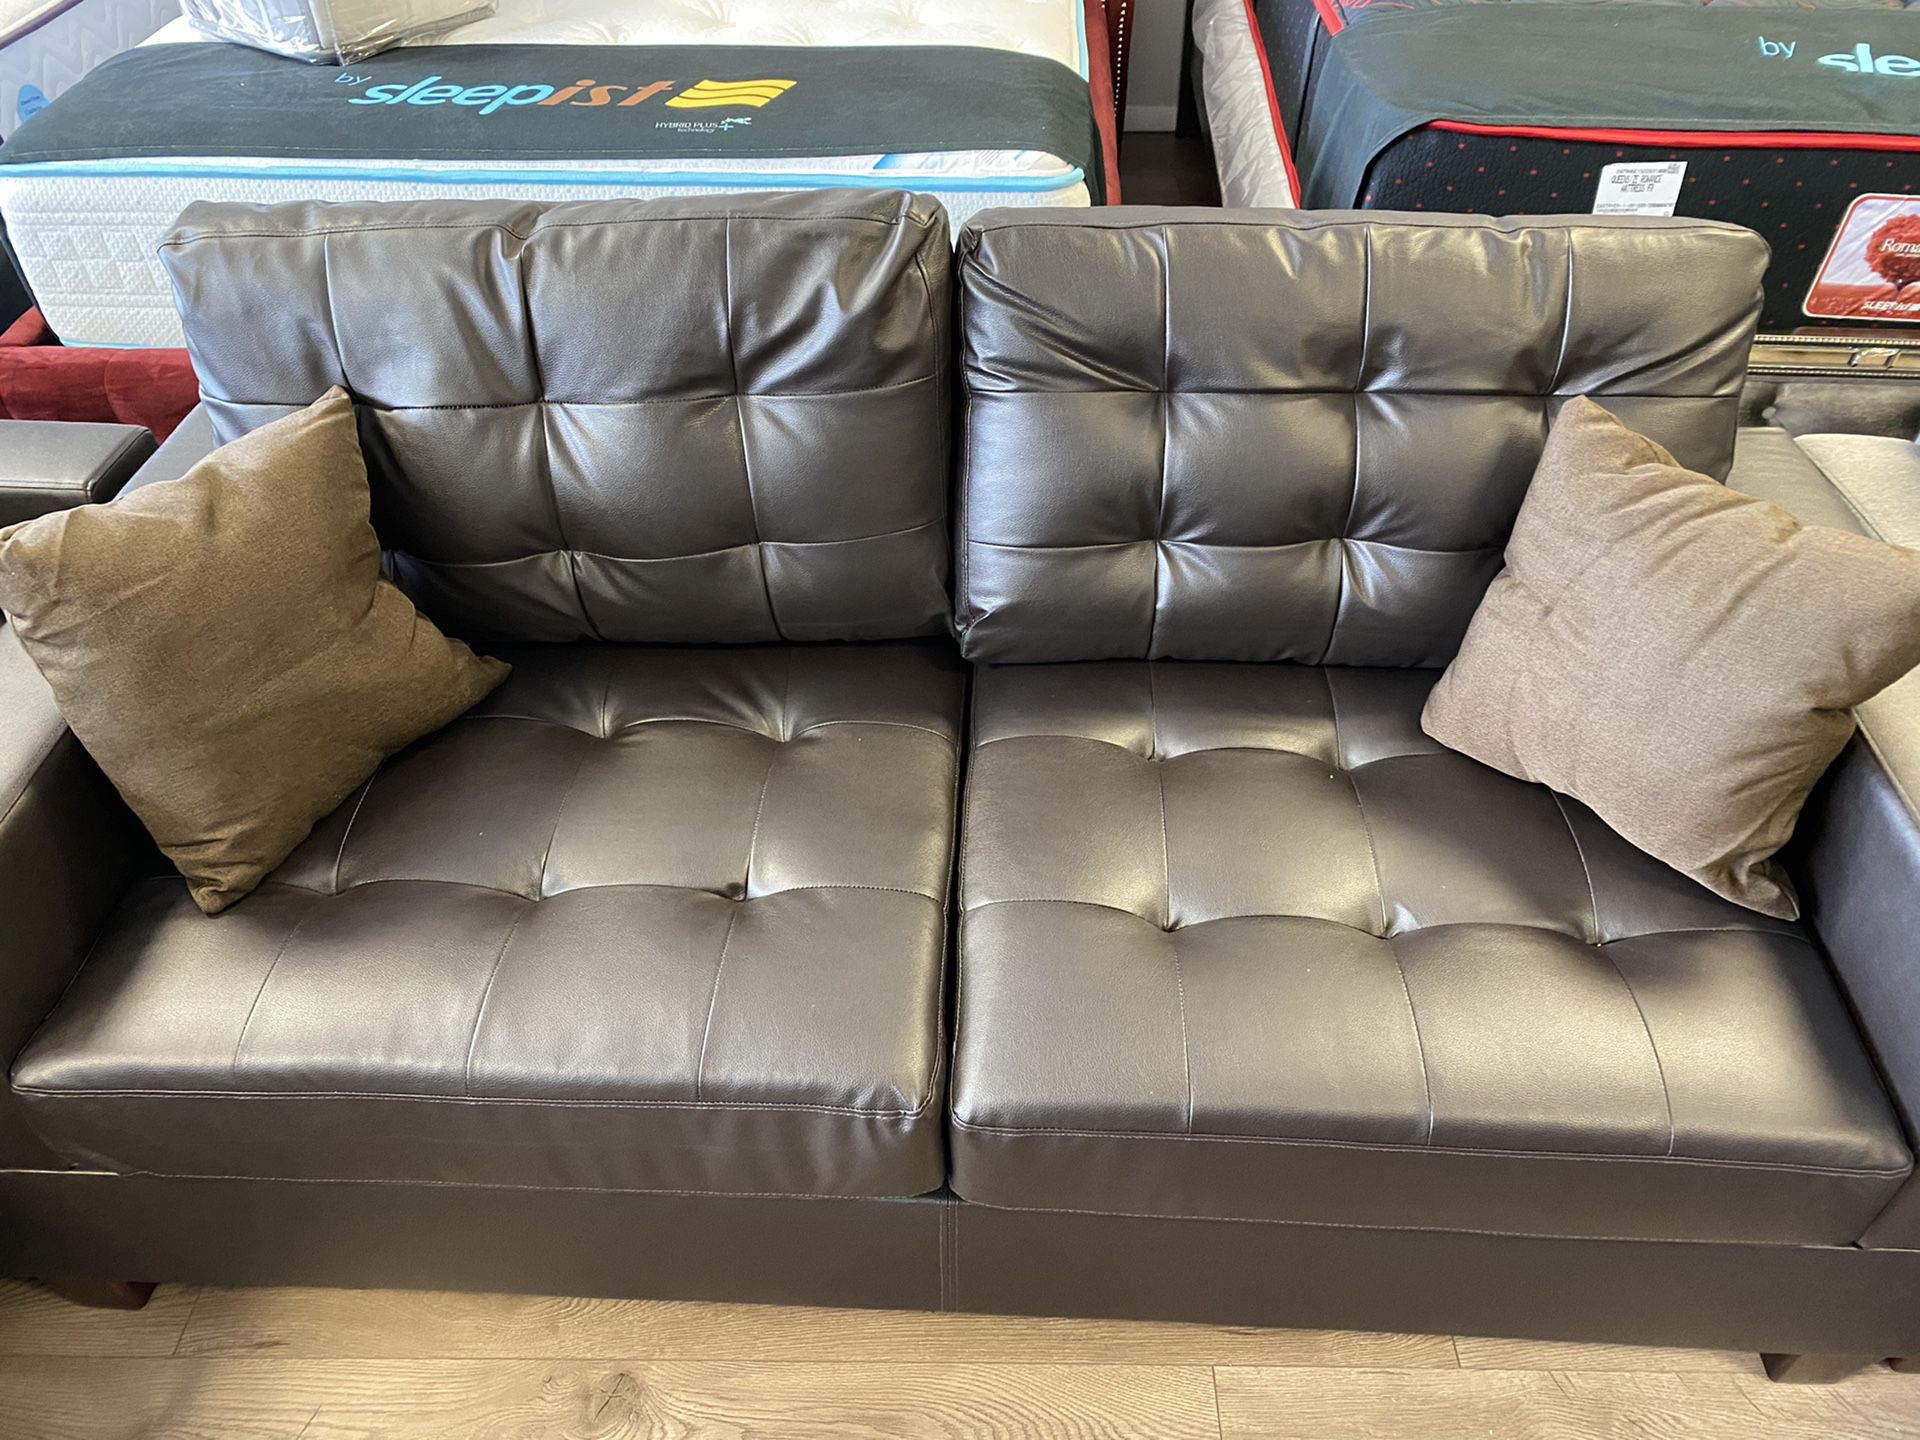 Bonded leather sofa and loveseat